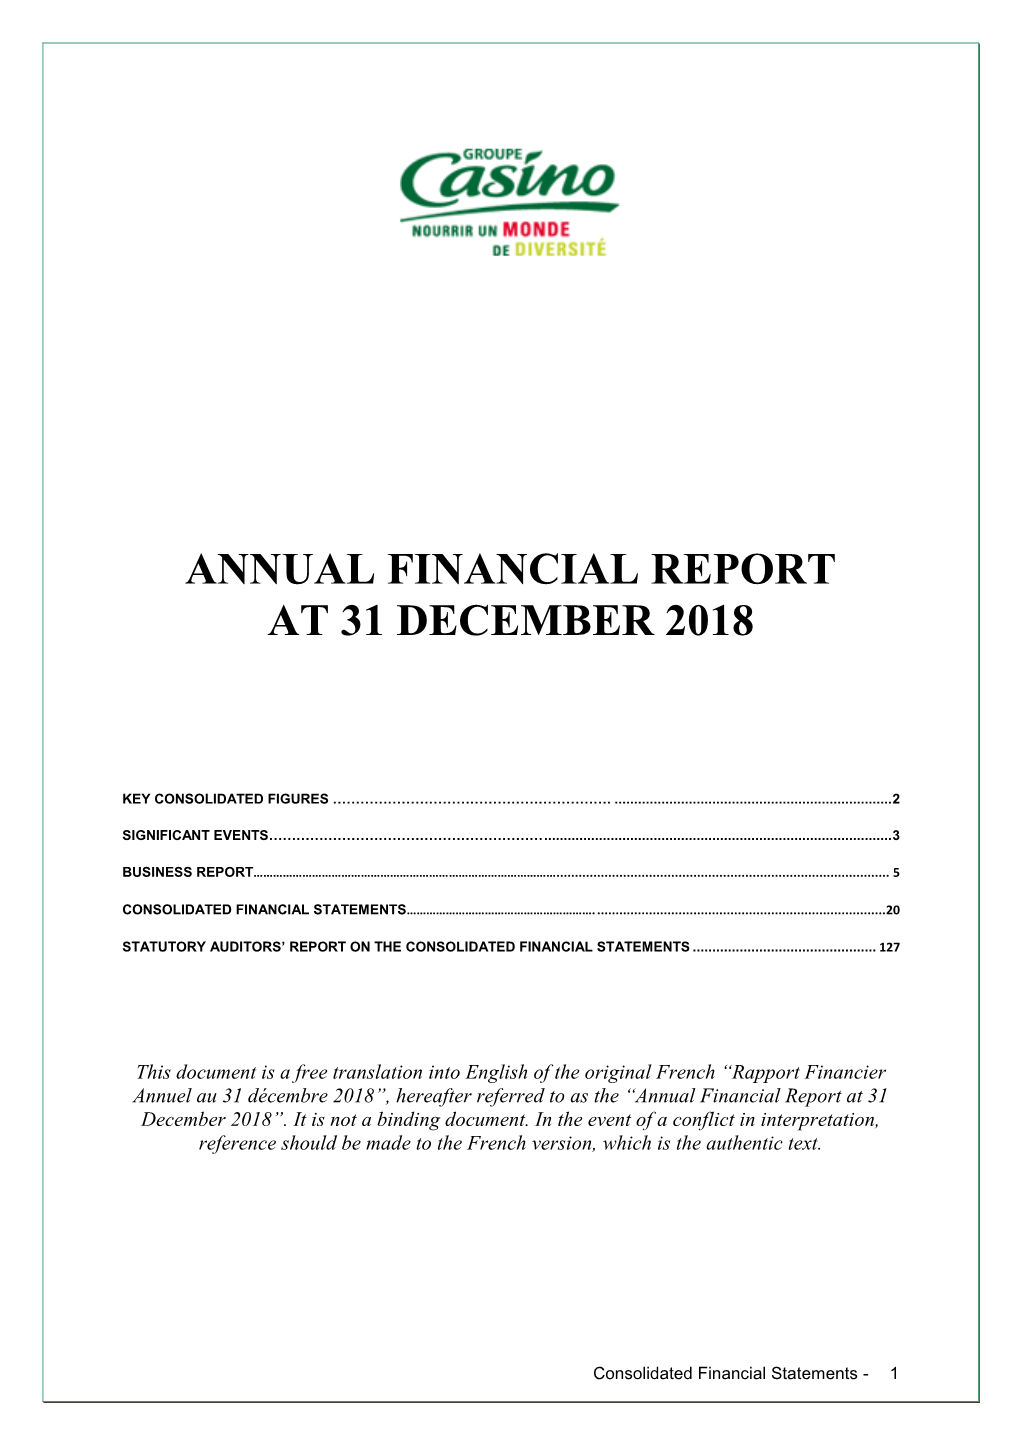 Consolidated Financial Statements…………………………………………………